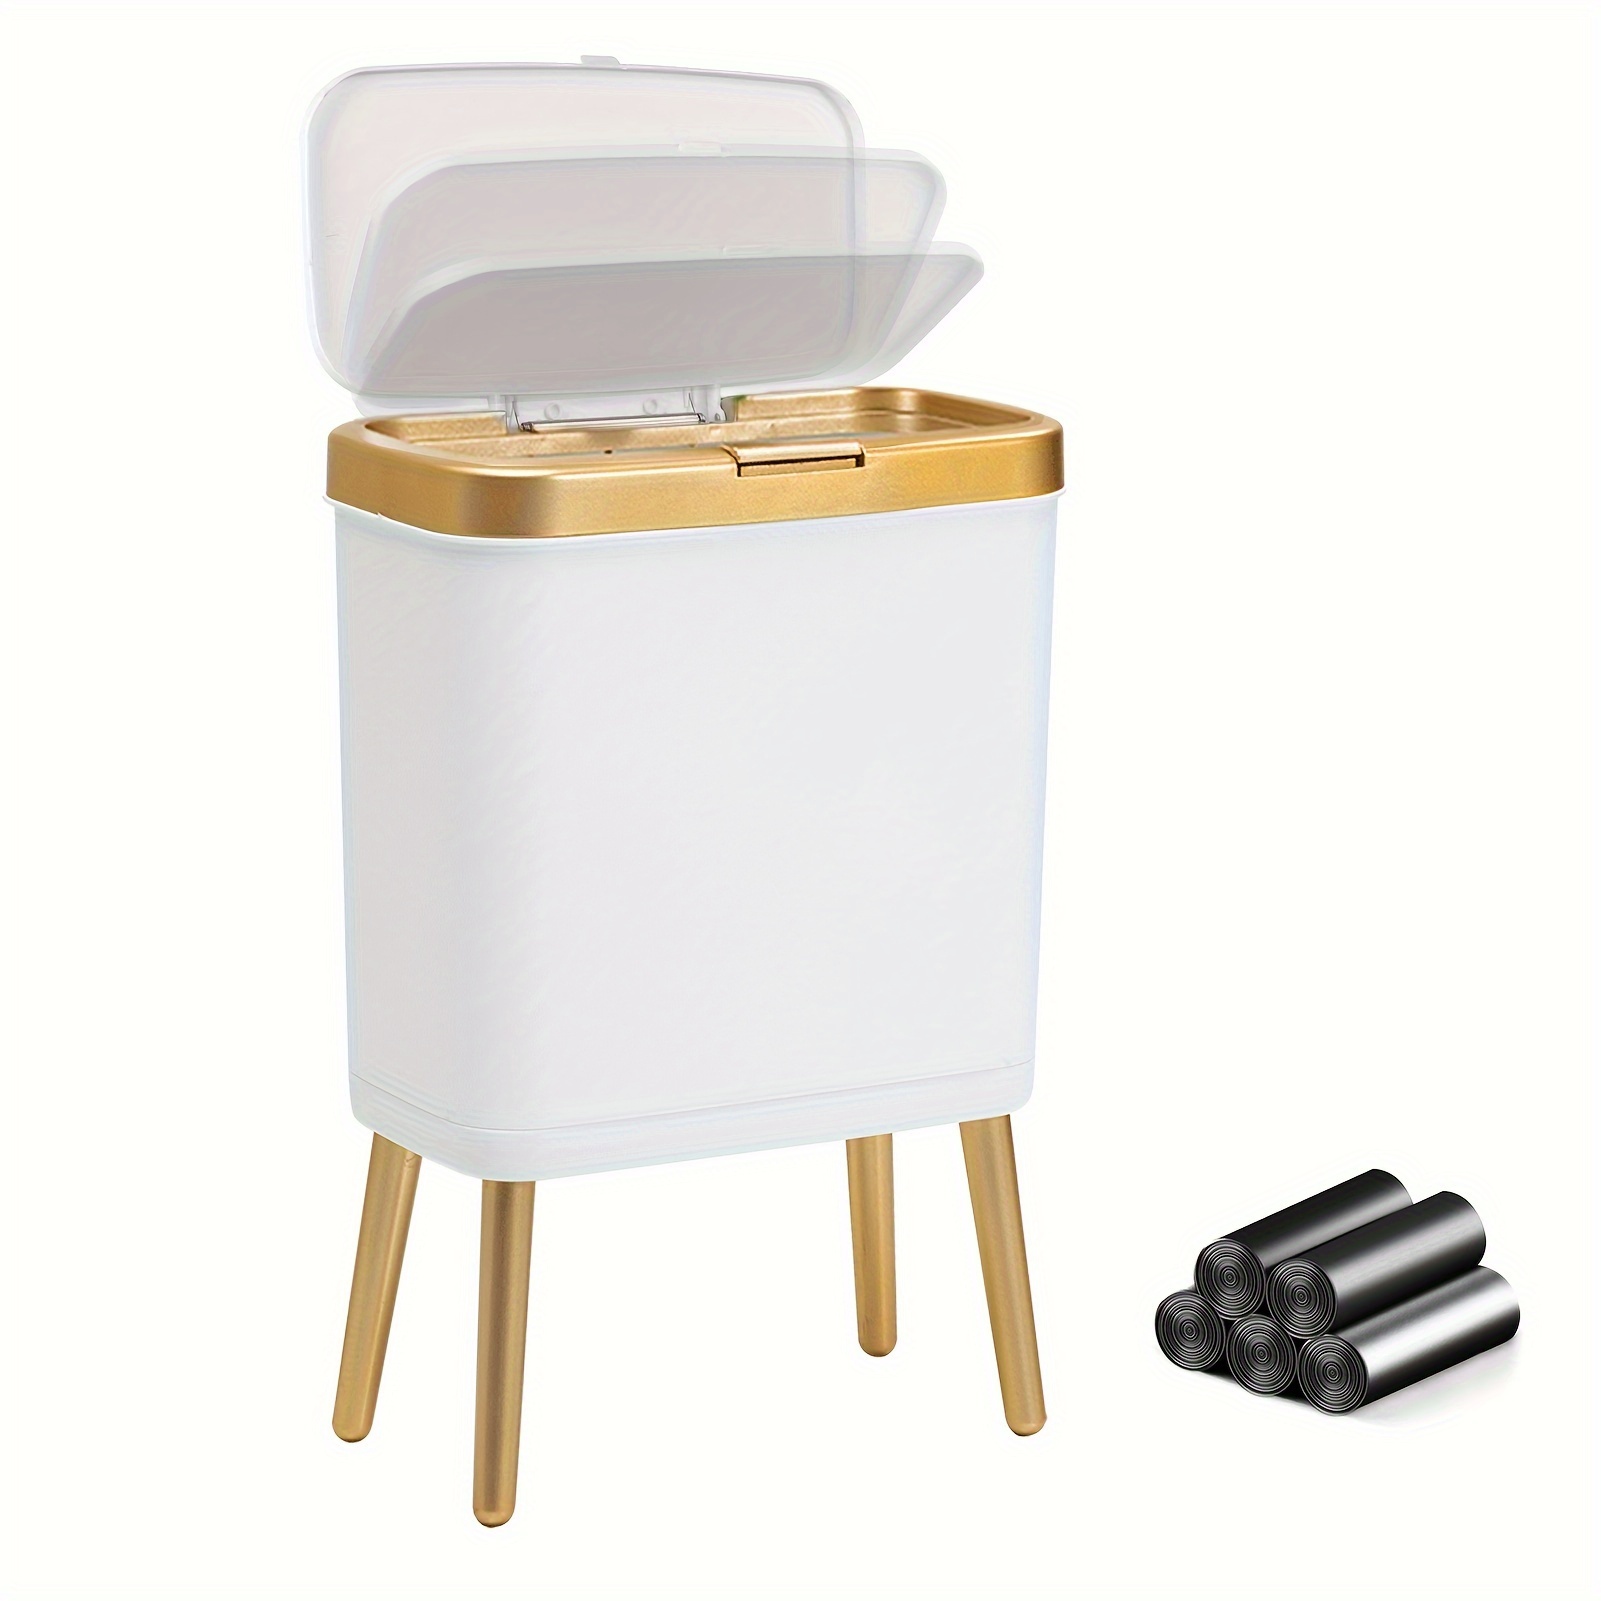 

Bathroom Trash Can With Lid, 4 Gallon Slim Garbage Can With High Foot, Dog Proof Trash Can With Press-top, Modern White And Gold Trash Bin, Decorative Waste Basket For Bedroom (1, Hf-white)